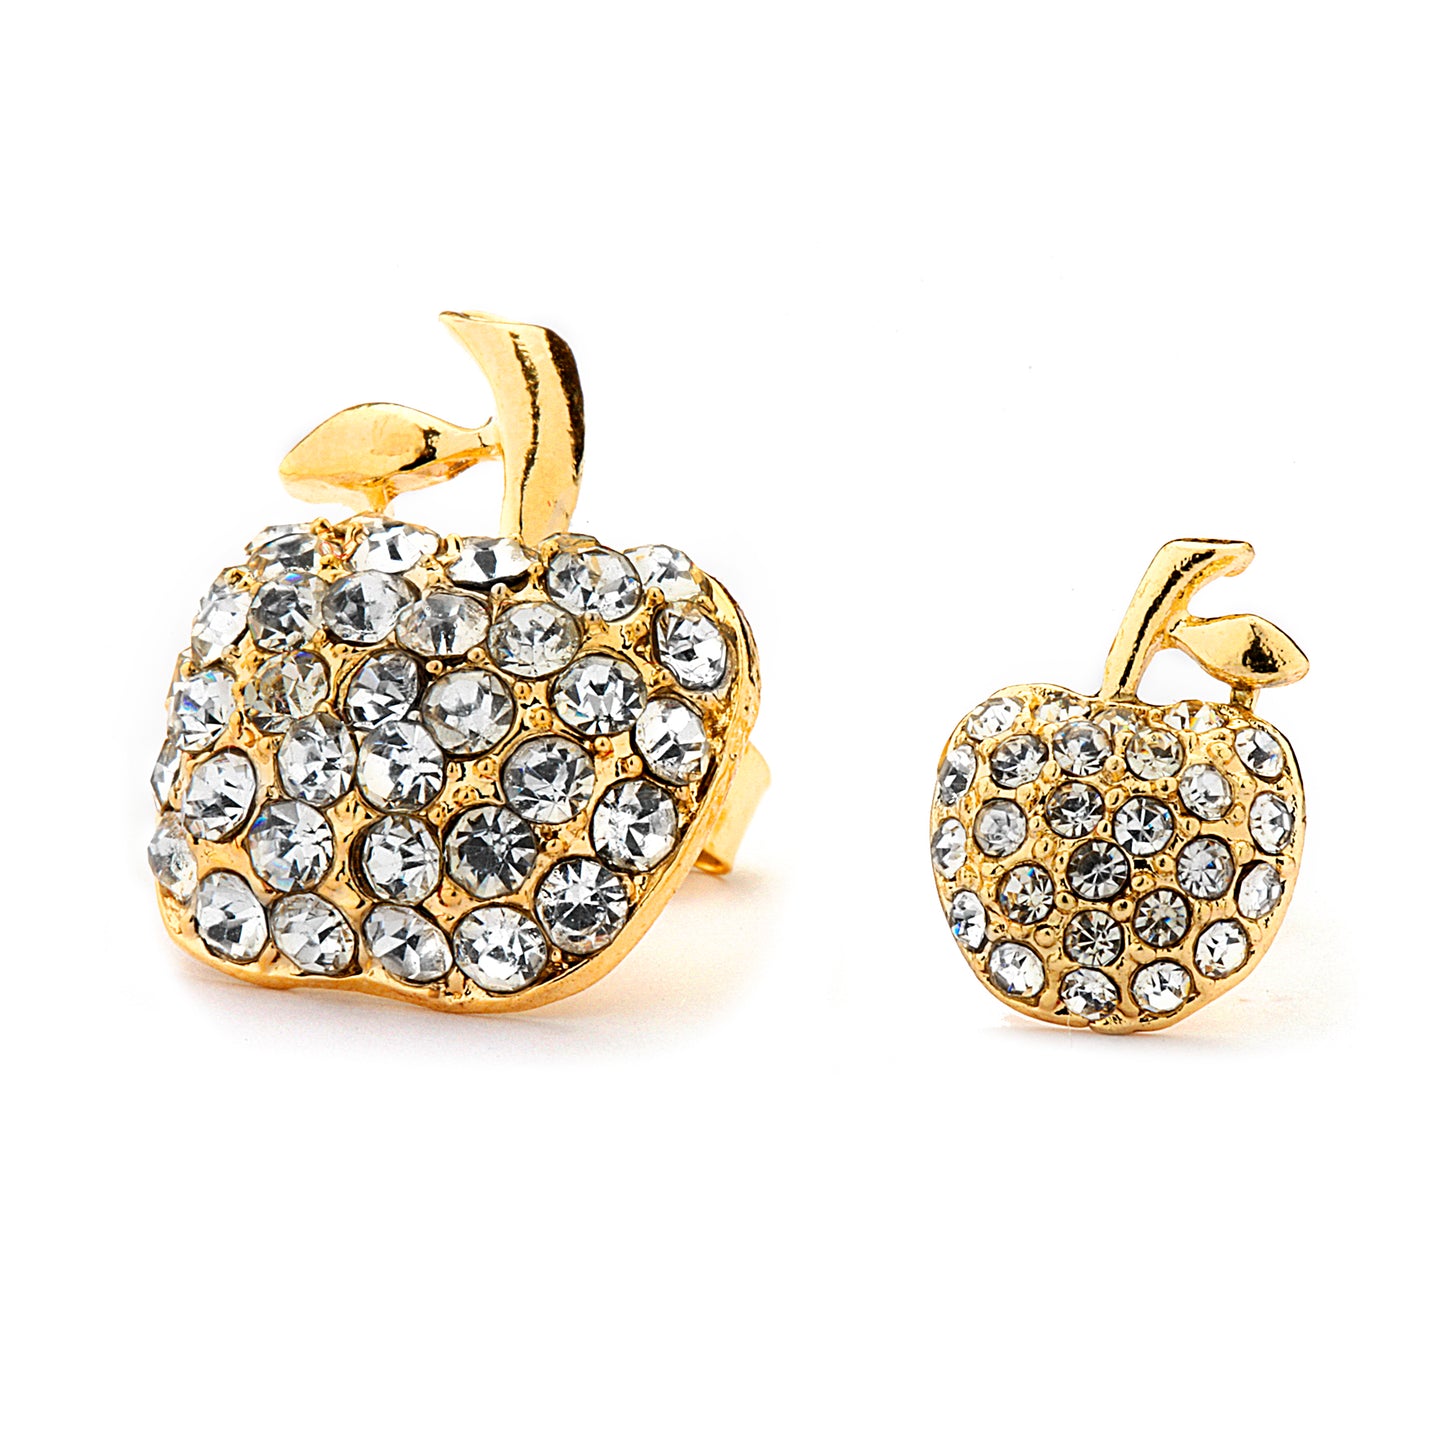 Pave CZ Apple Earrings 14-kt Gold Filled